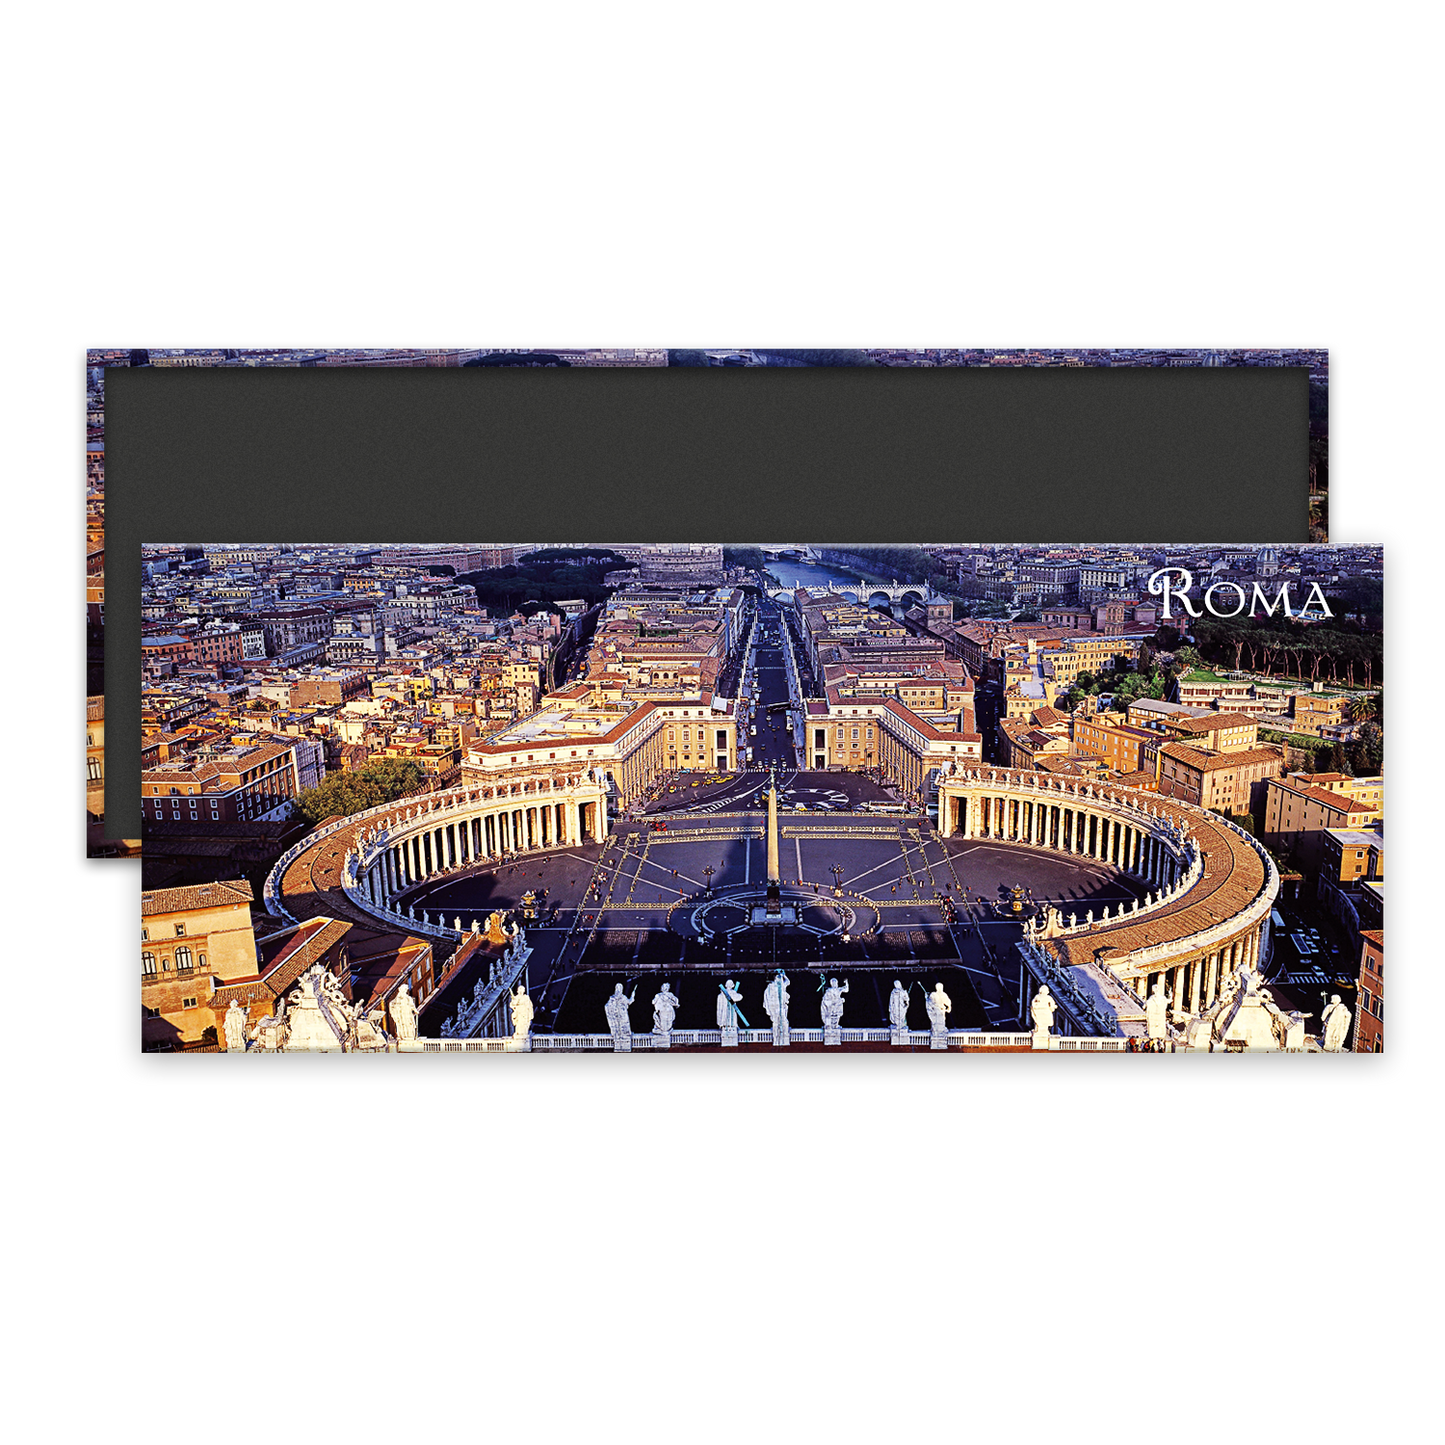 RM M 003 - St. Peter's Square